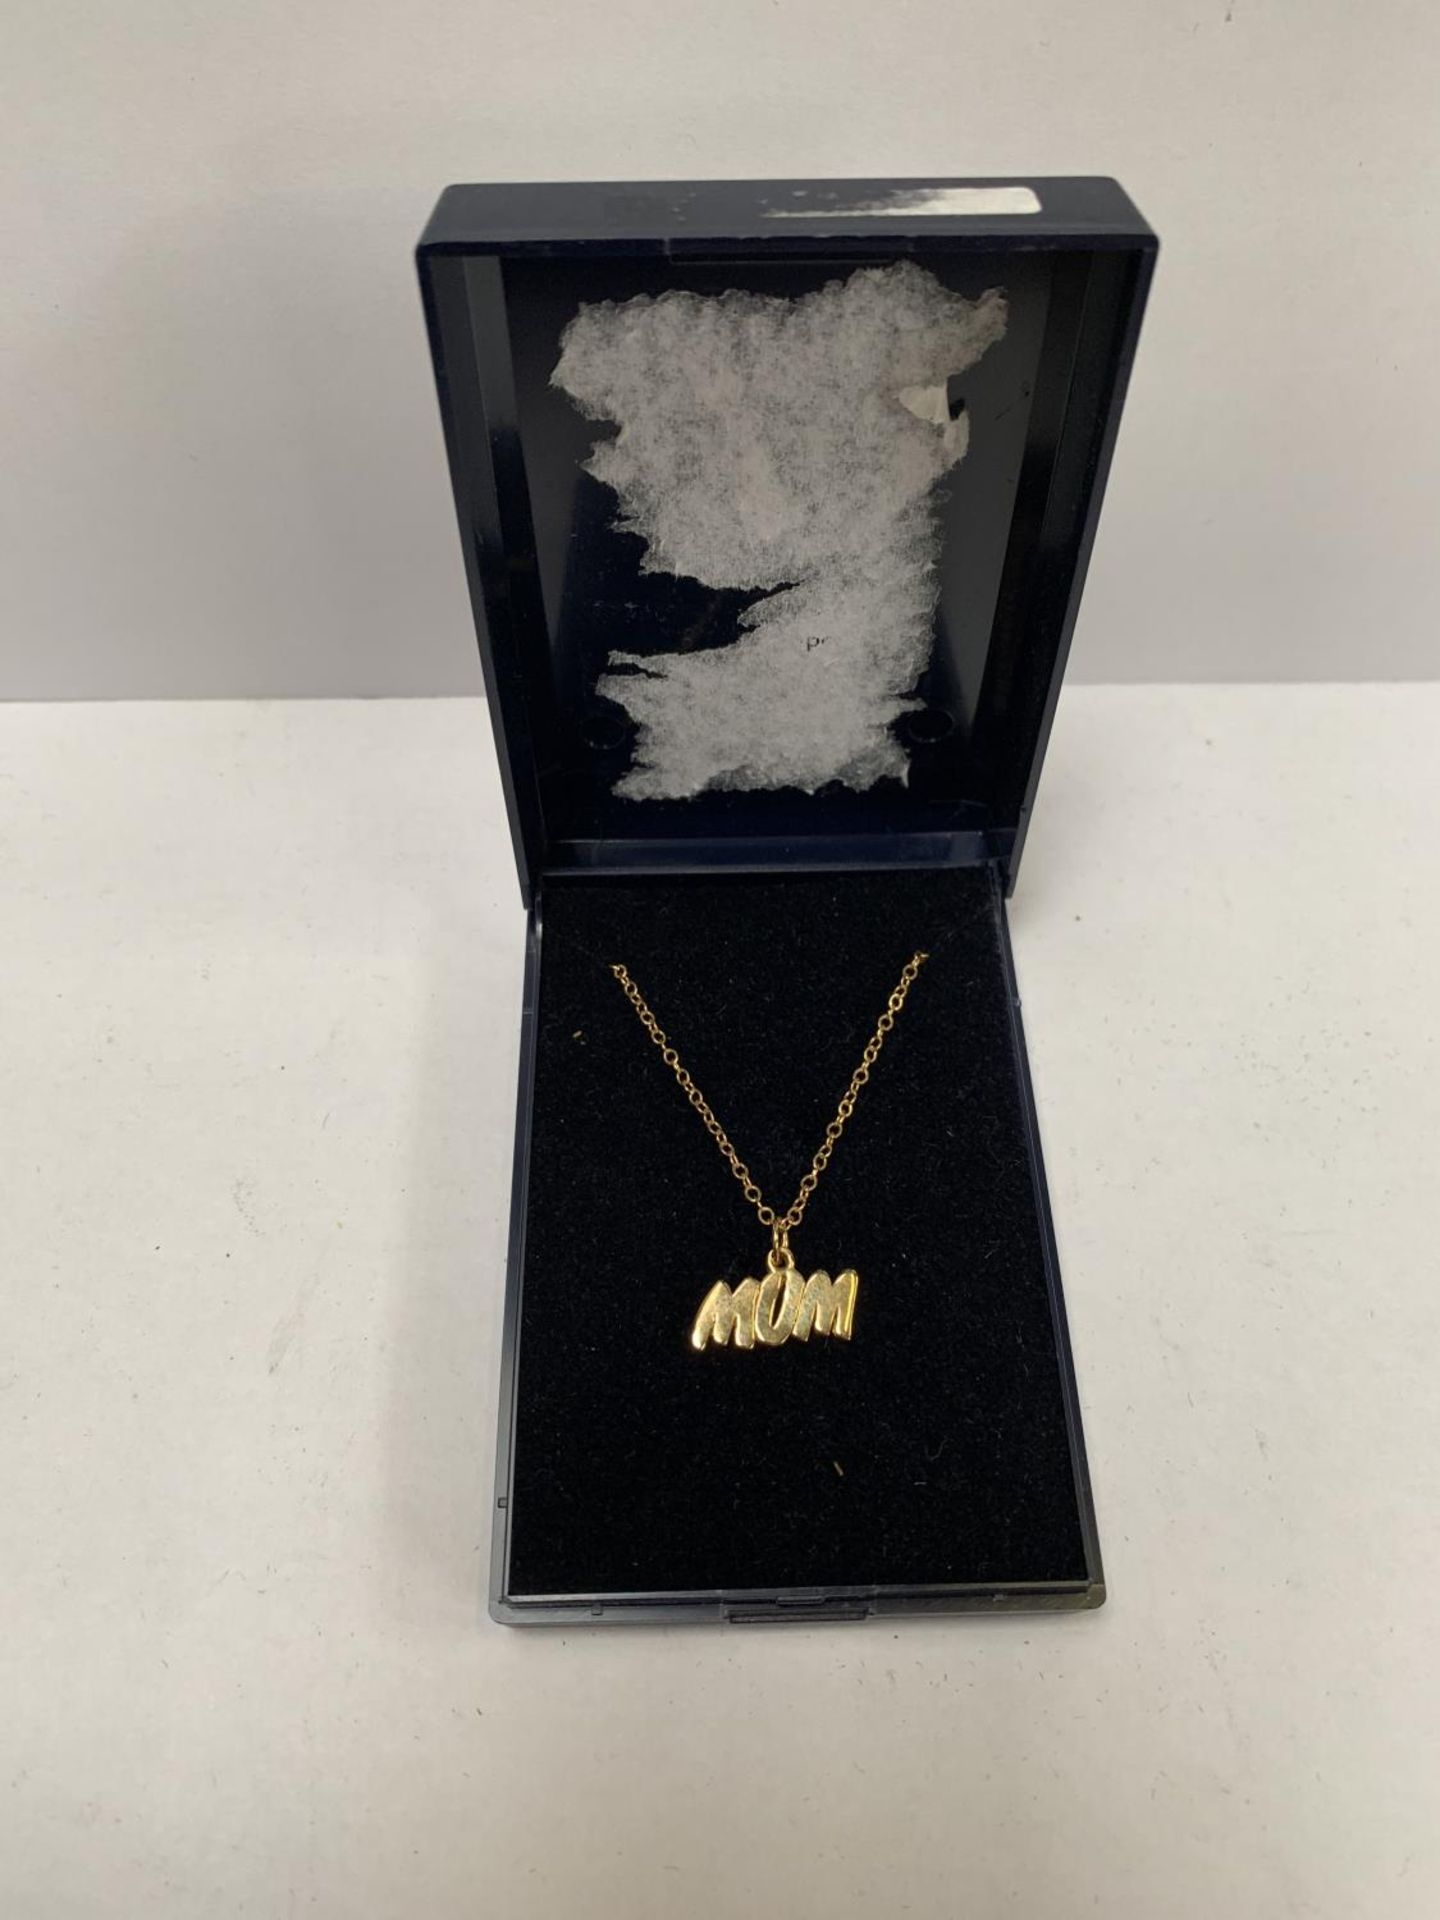 A YELLOW METAL 'MUM' NECKLACE